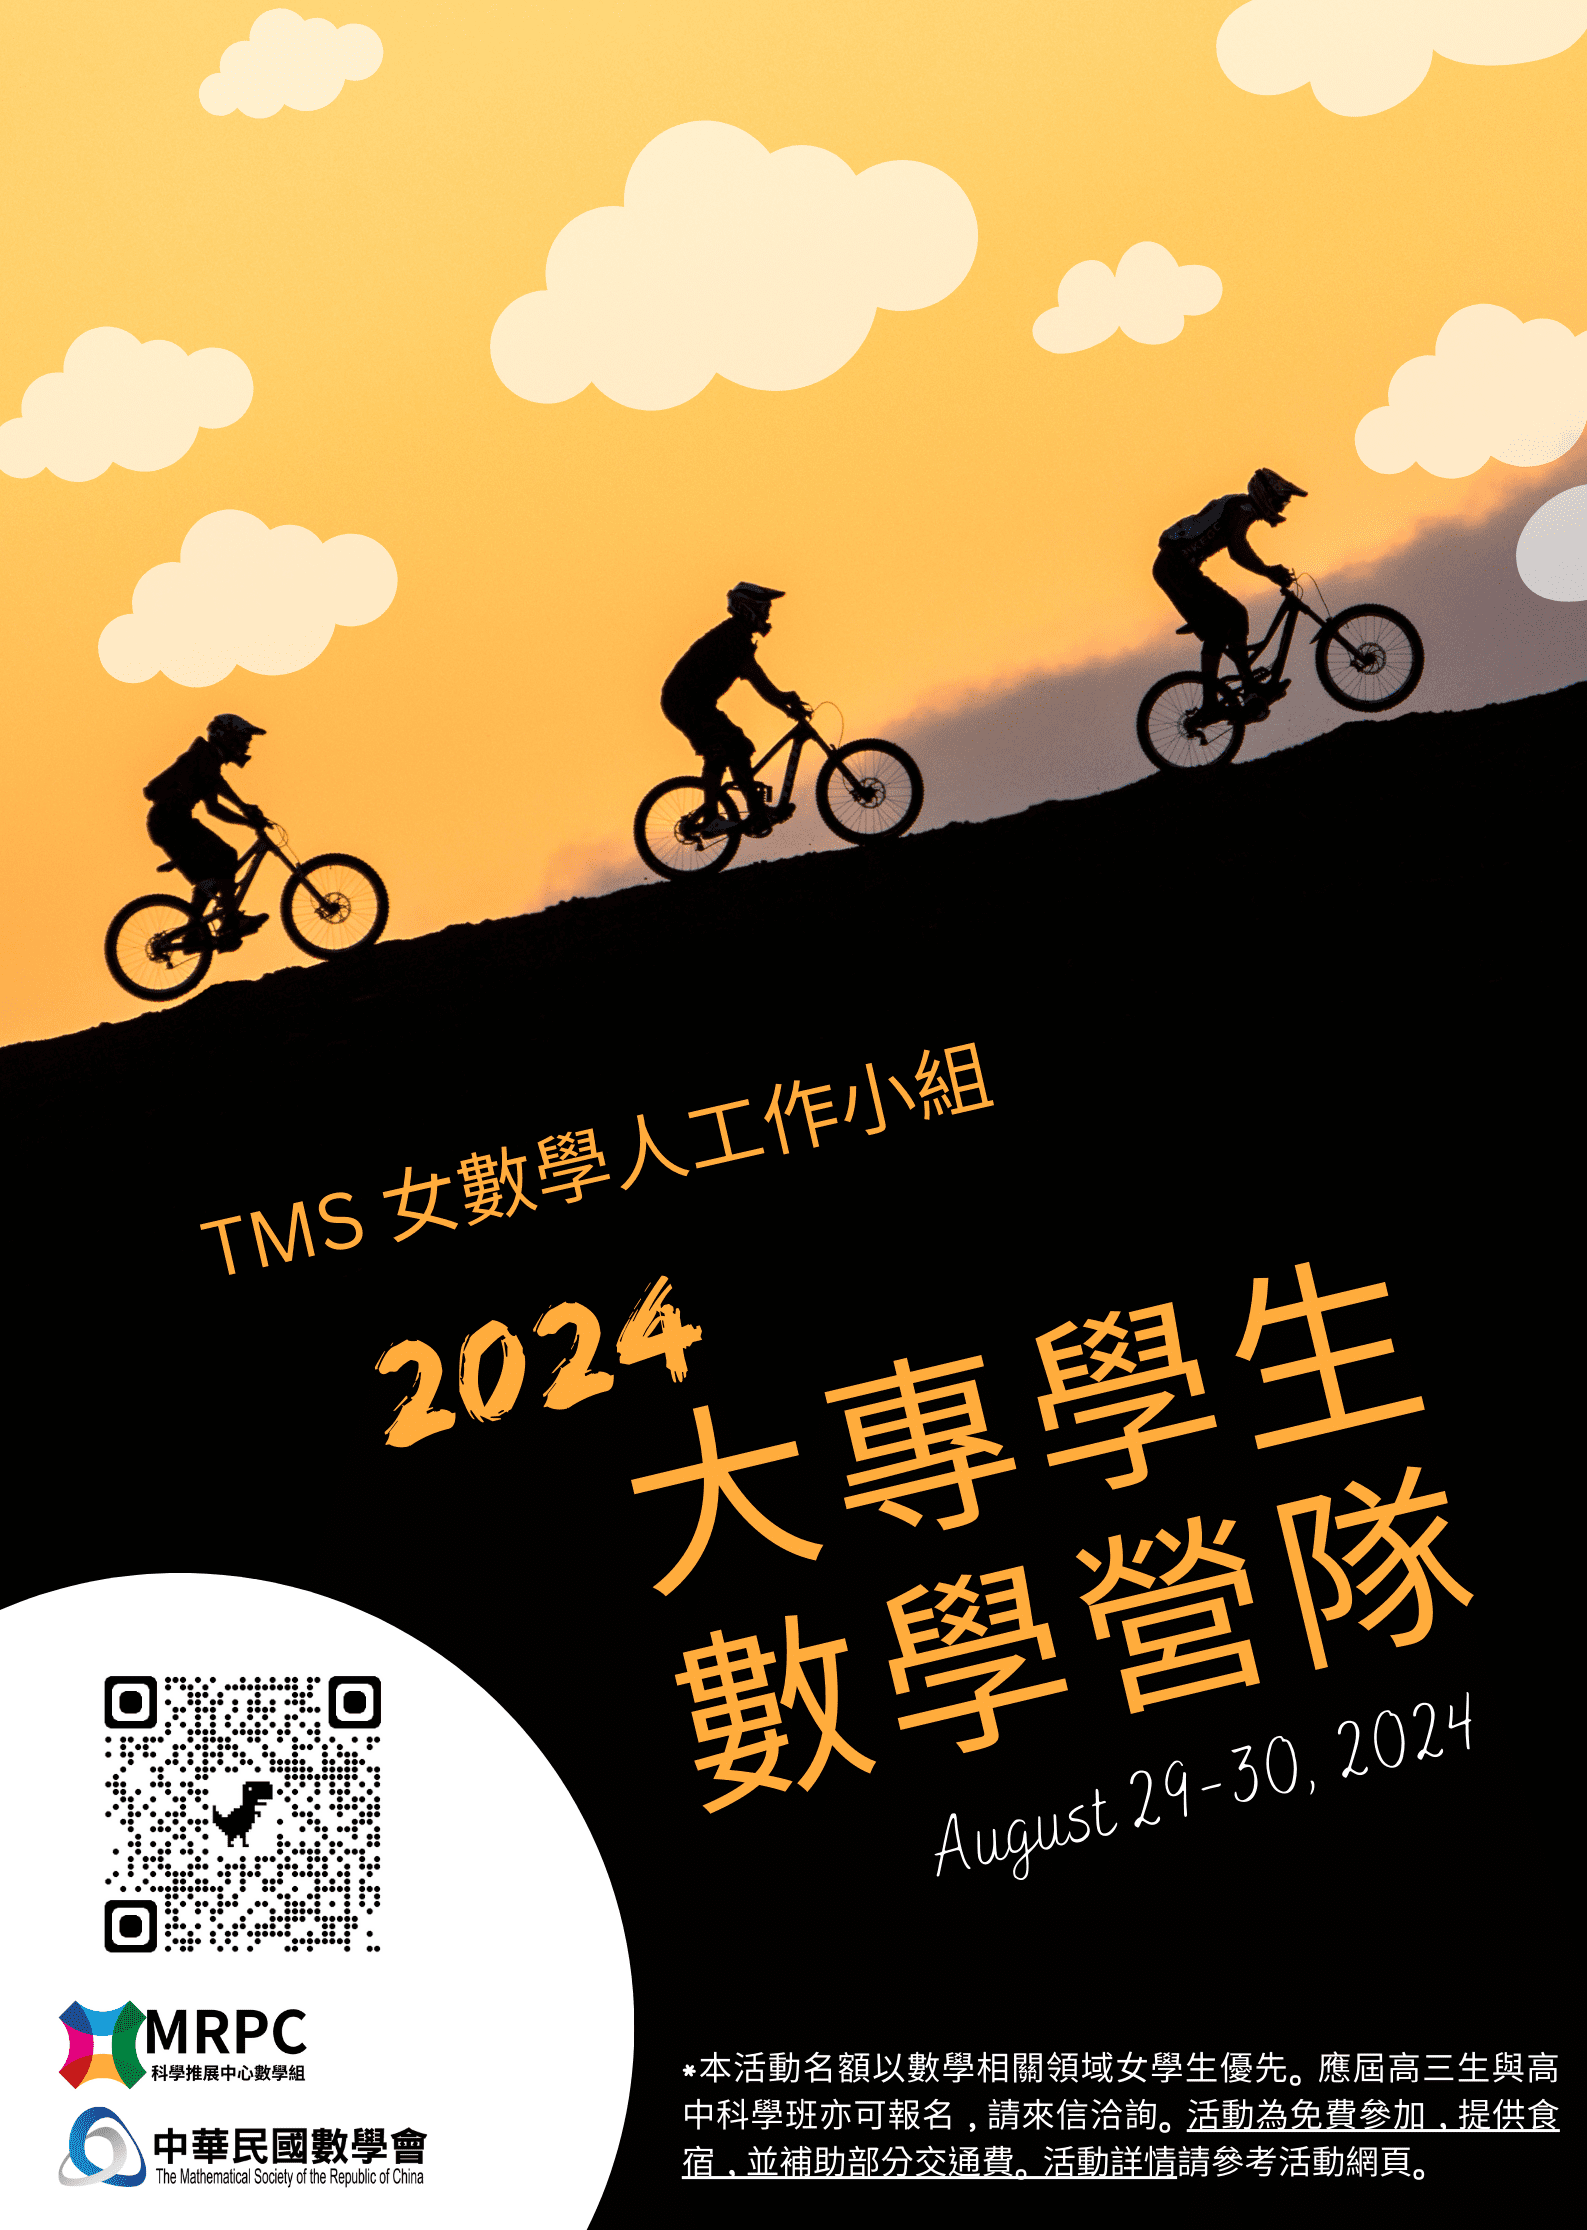 Featured image for “2024大專學生數學營”